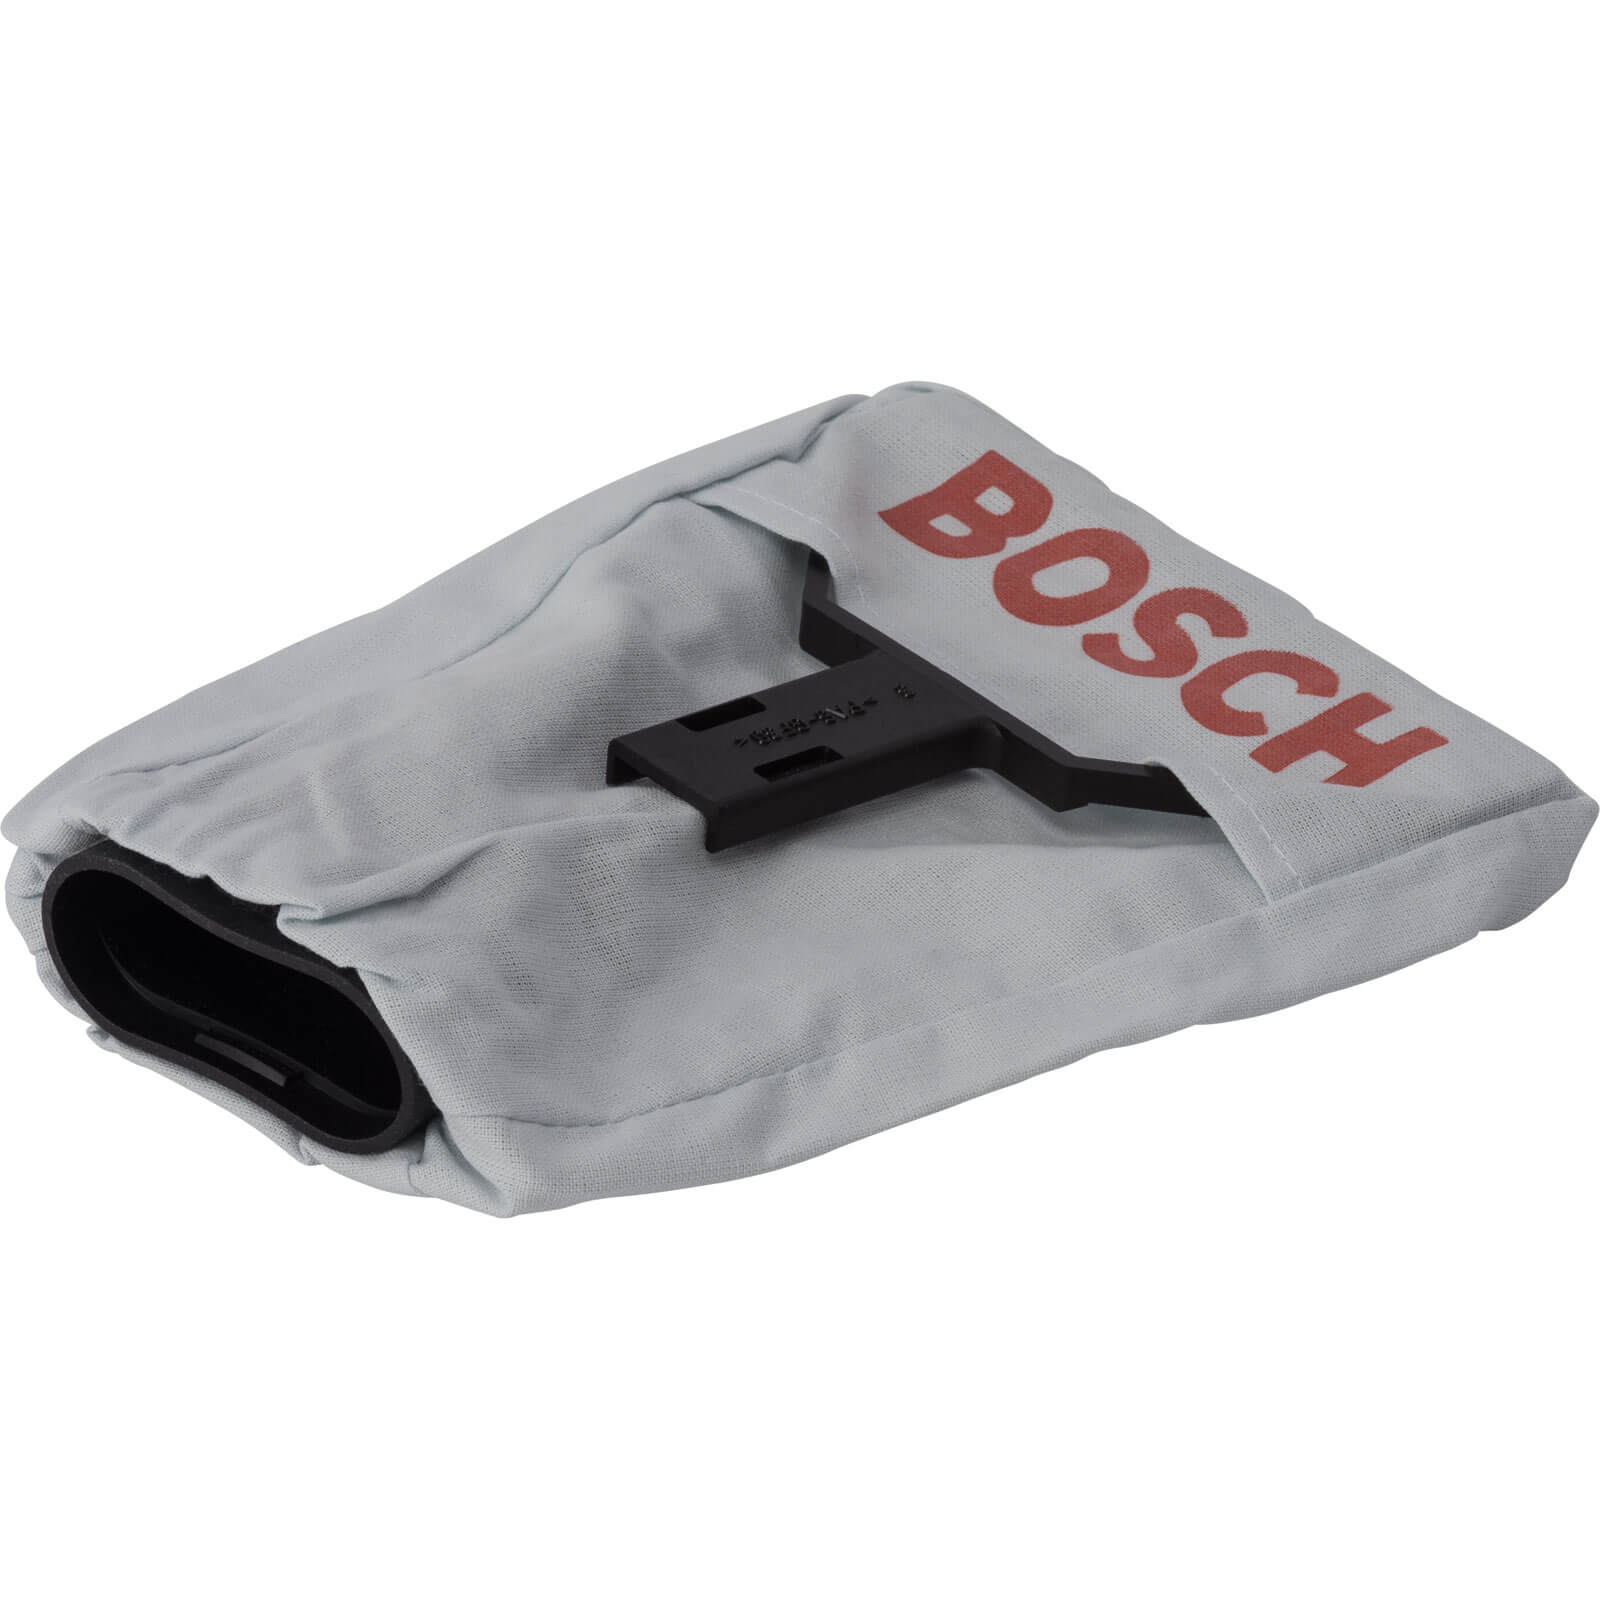 Image of Bosch Dust Bag for PEX GEX and GBS series Sanders